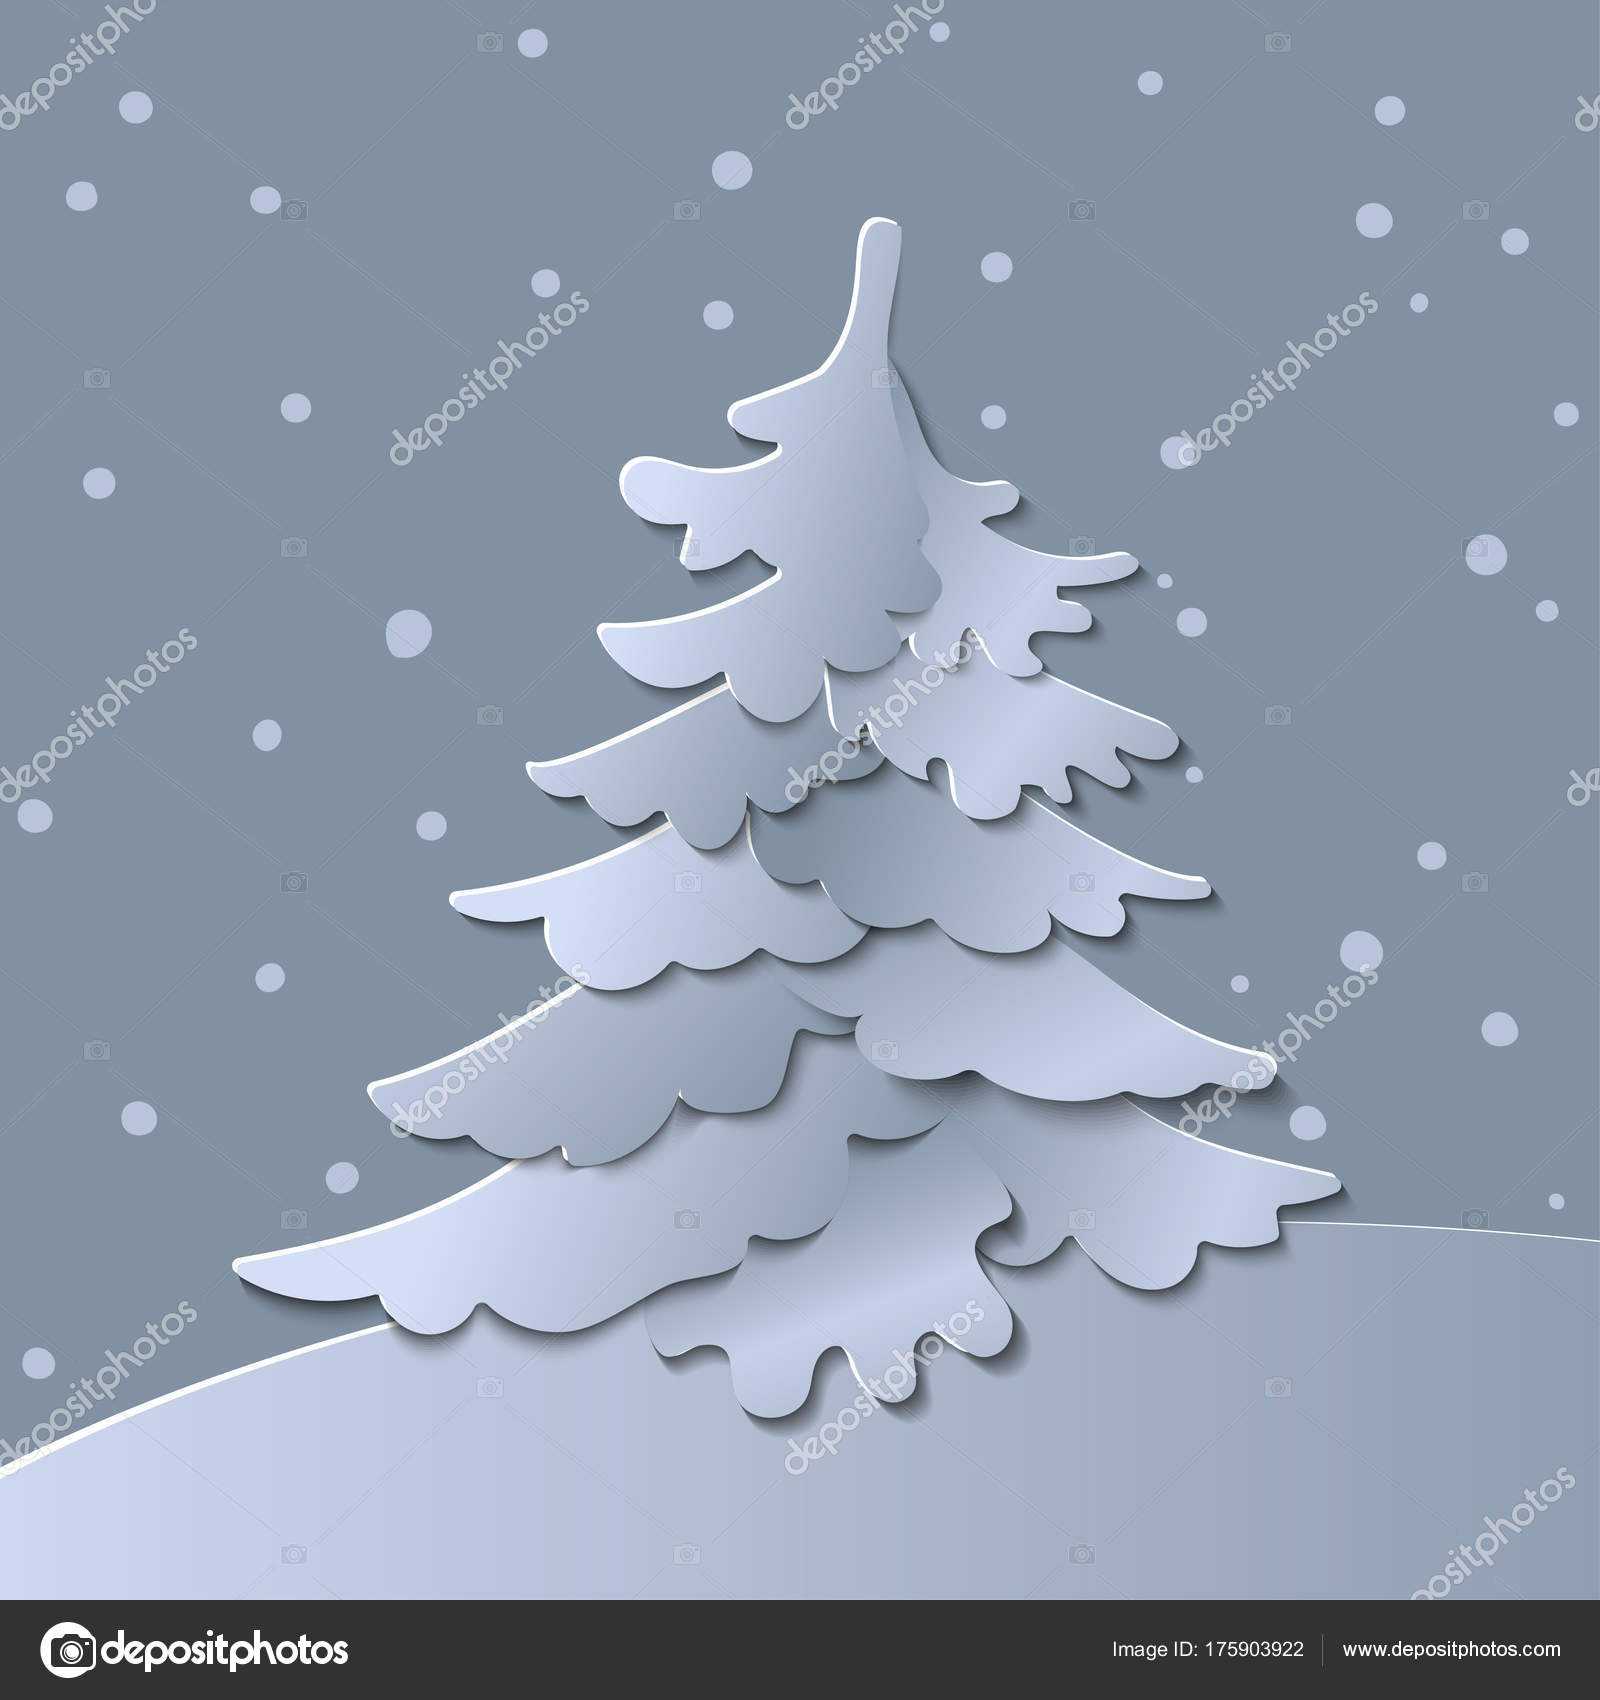 3D Abstract Paper Cut Illustration Of Christmas Tree. Vector In 3D Christmas Tree Card Template